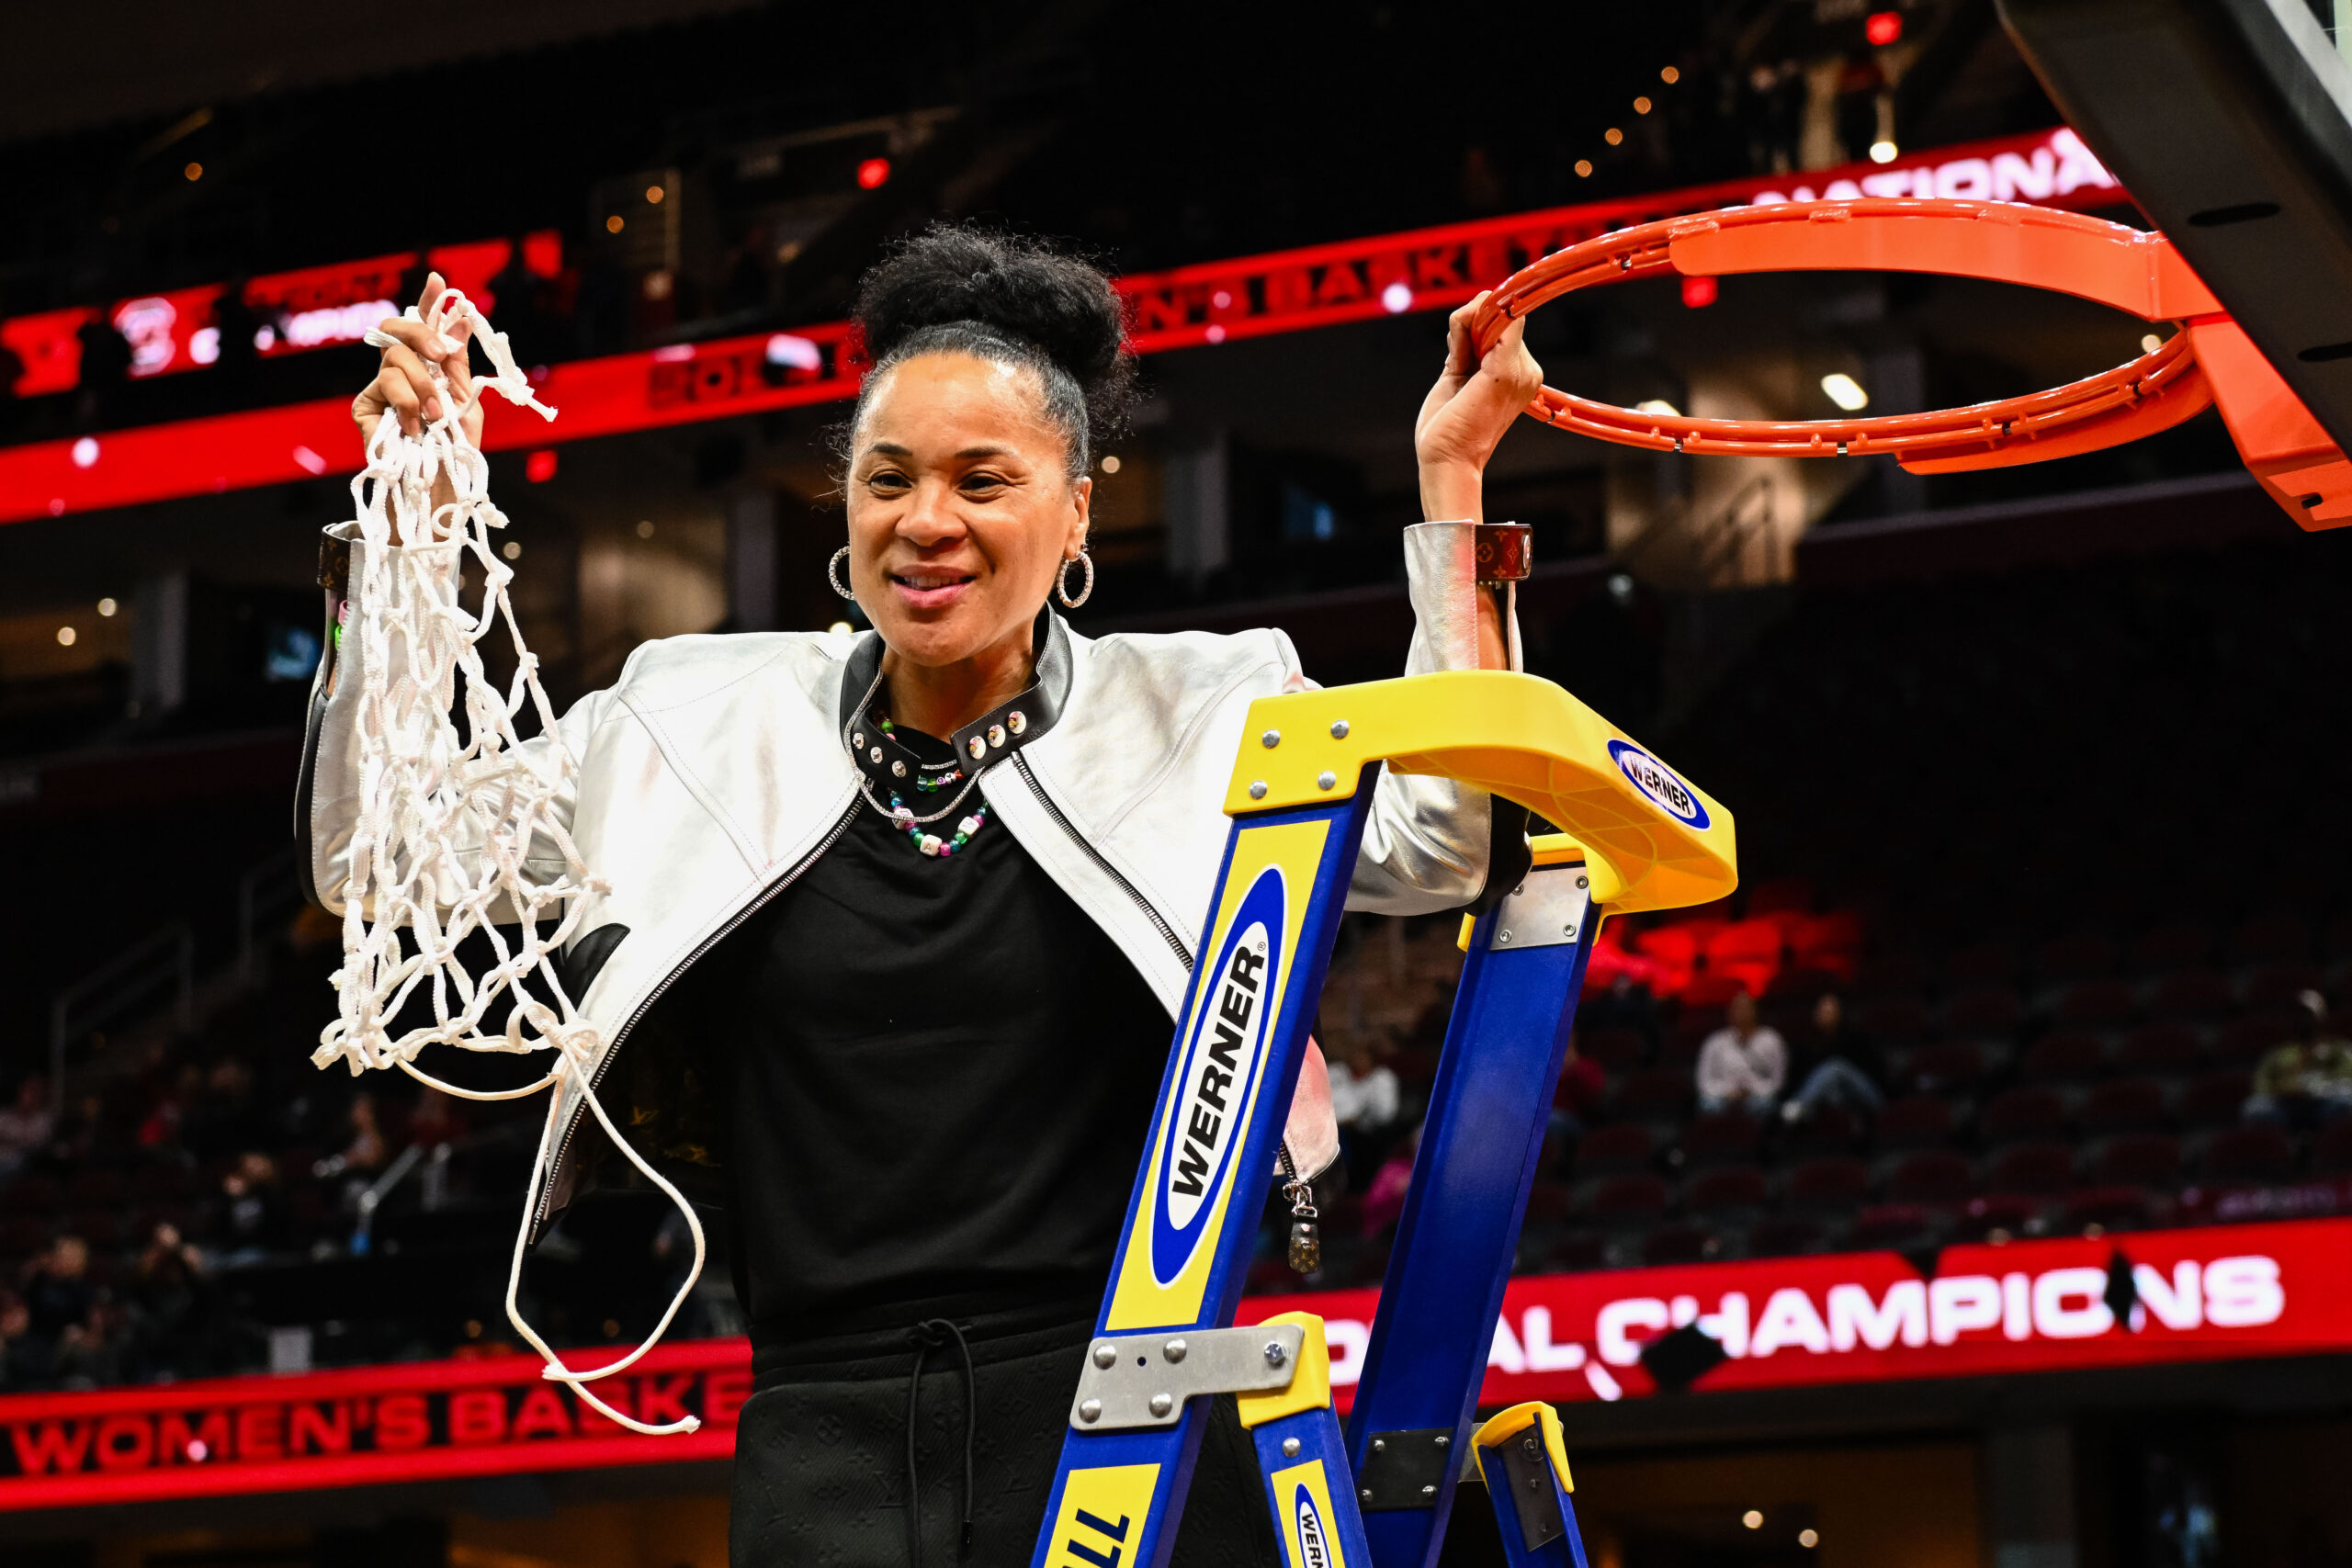 Where does Dawn Staley live? Let's take a look into her basketball journey and where she's lived. Pictured: Dawn Staley